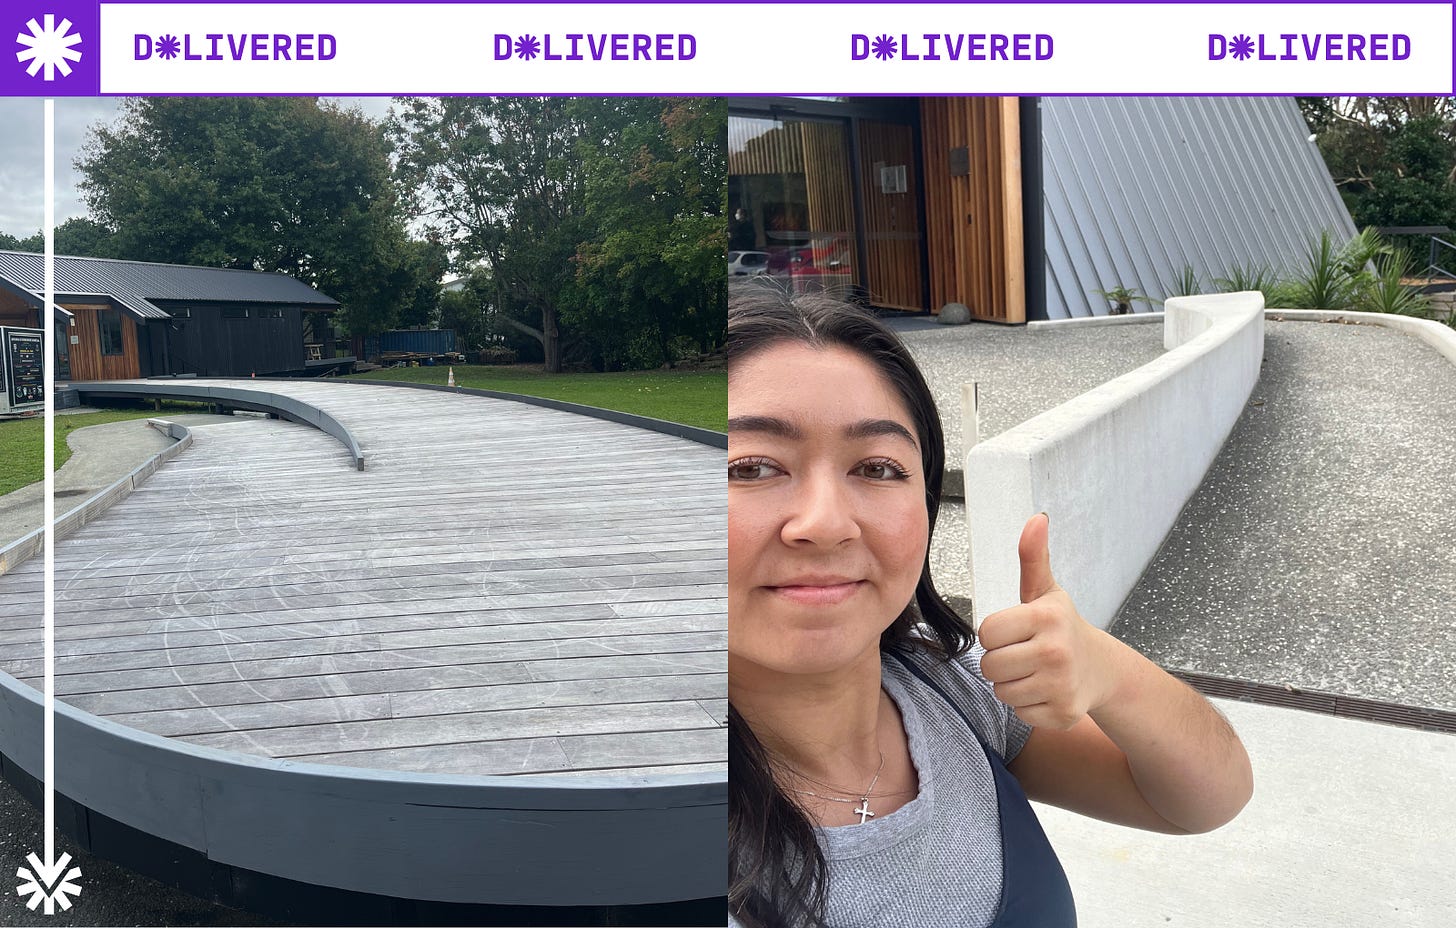 Image description: A collage image of two ramps - a wooden curved ramp, and Olivia does a selfie and thumbs up in front of a concrete ramp outside the marae.